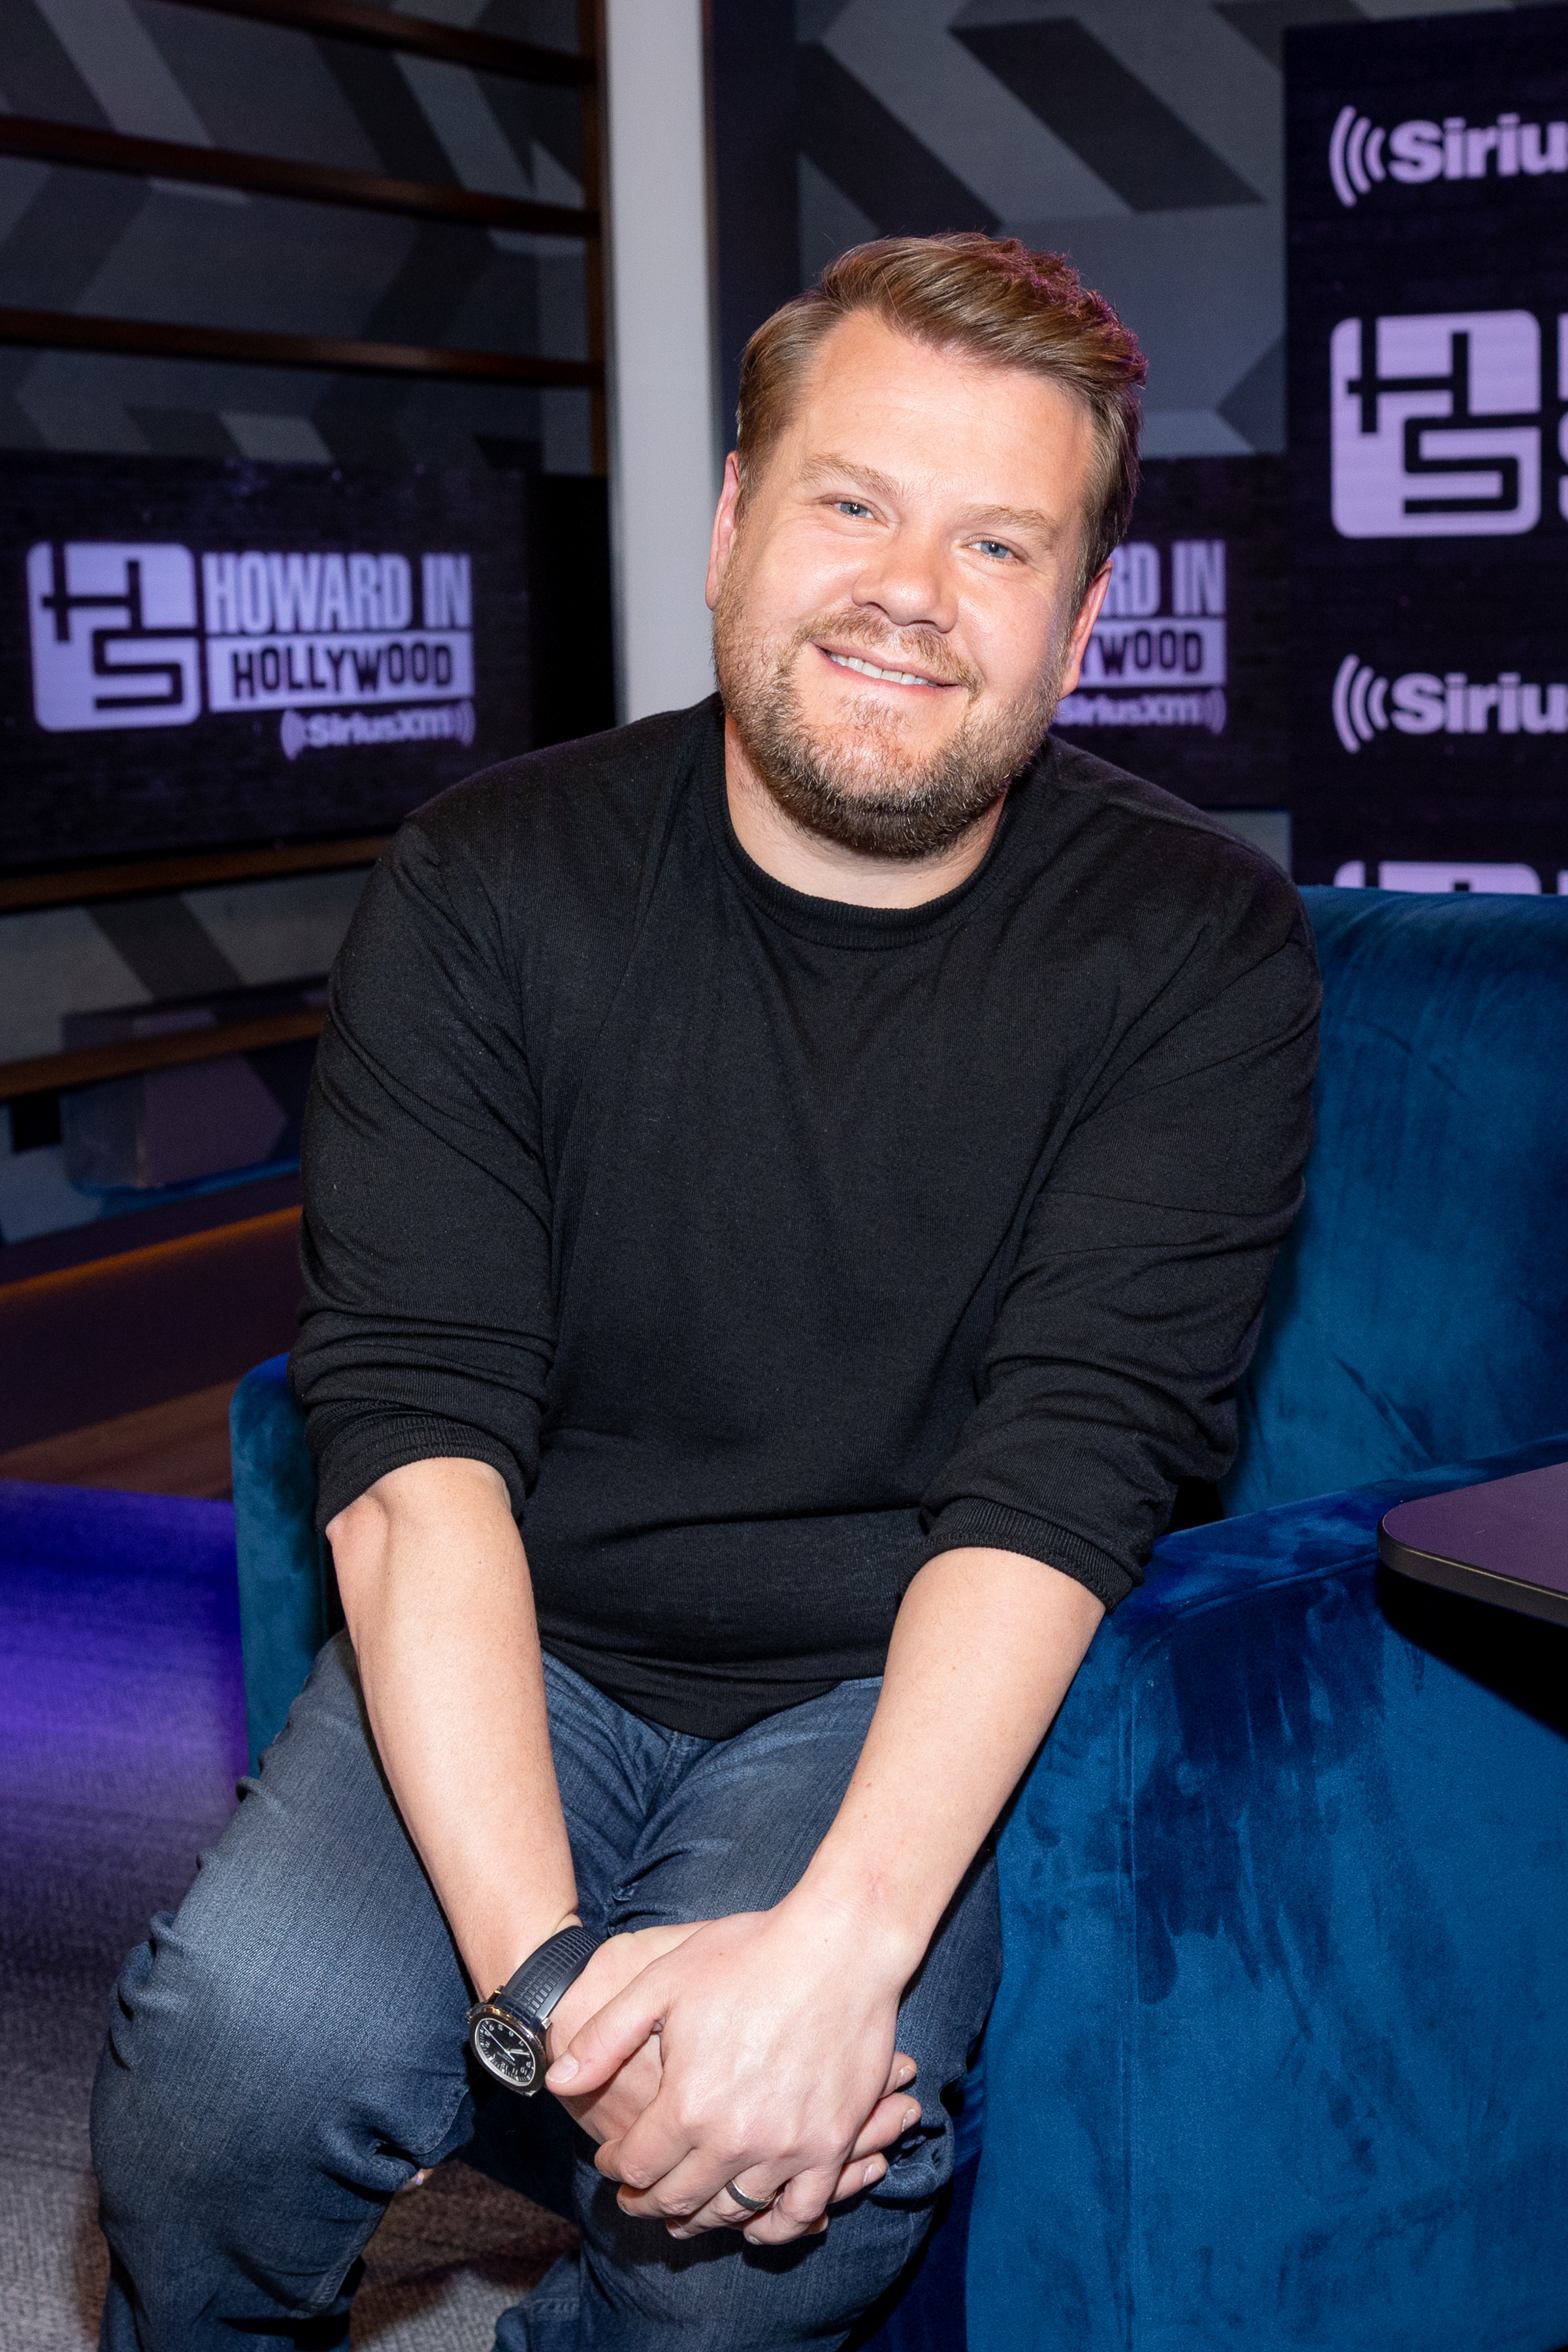 Close-up of James sitting in the SiriusXM studio and smiling